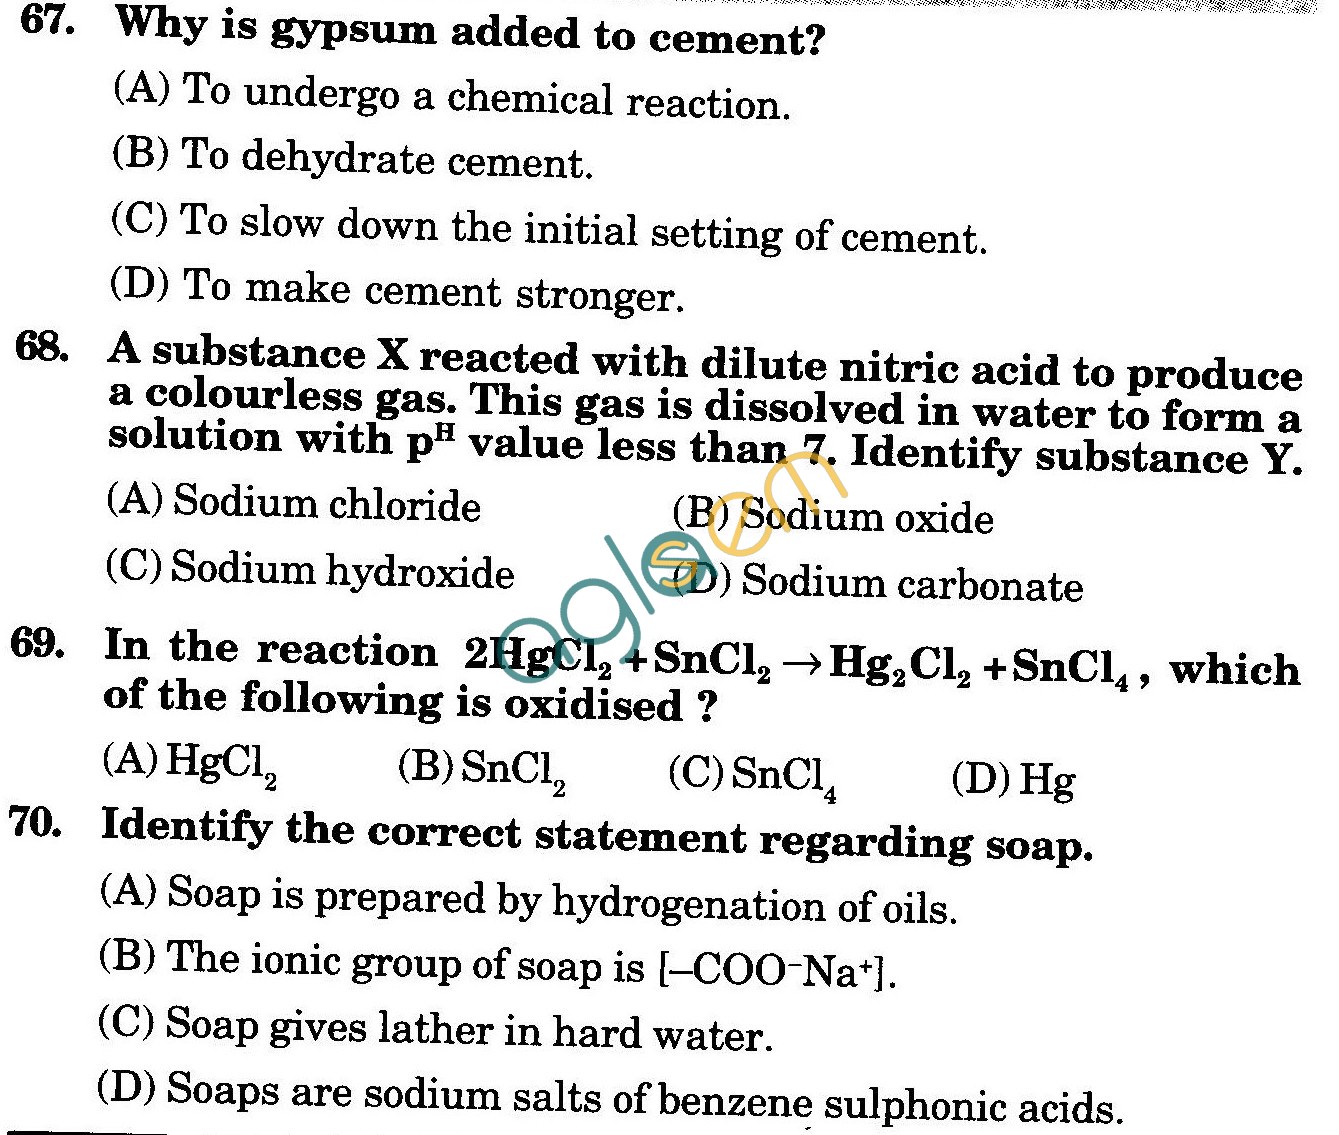 NSTSE 2010: Class X Question Paper with Answers - Chemistry